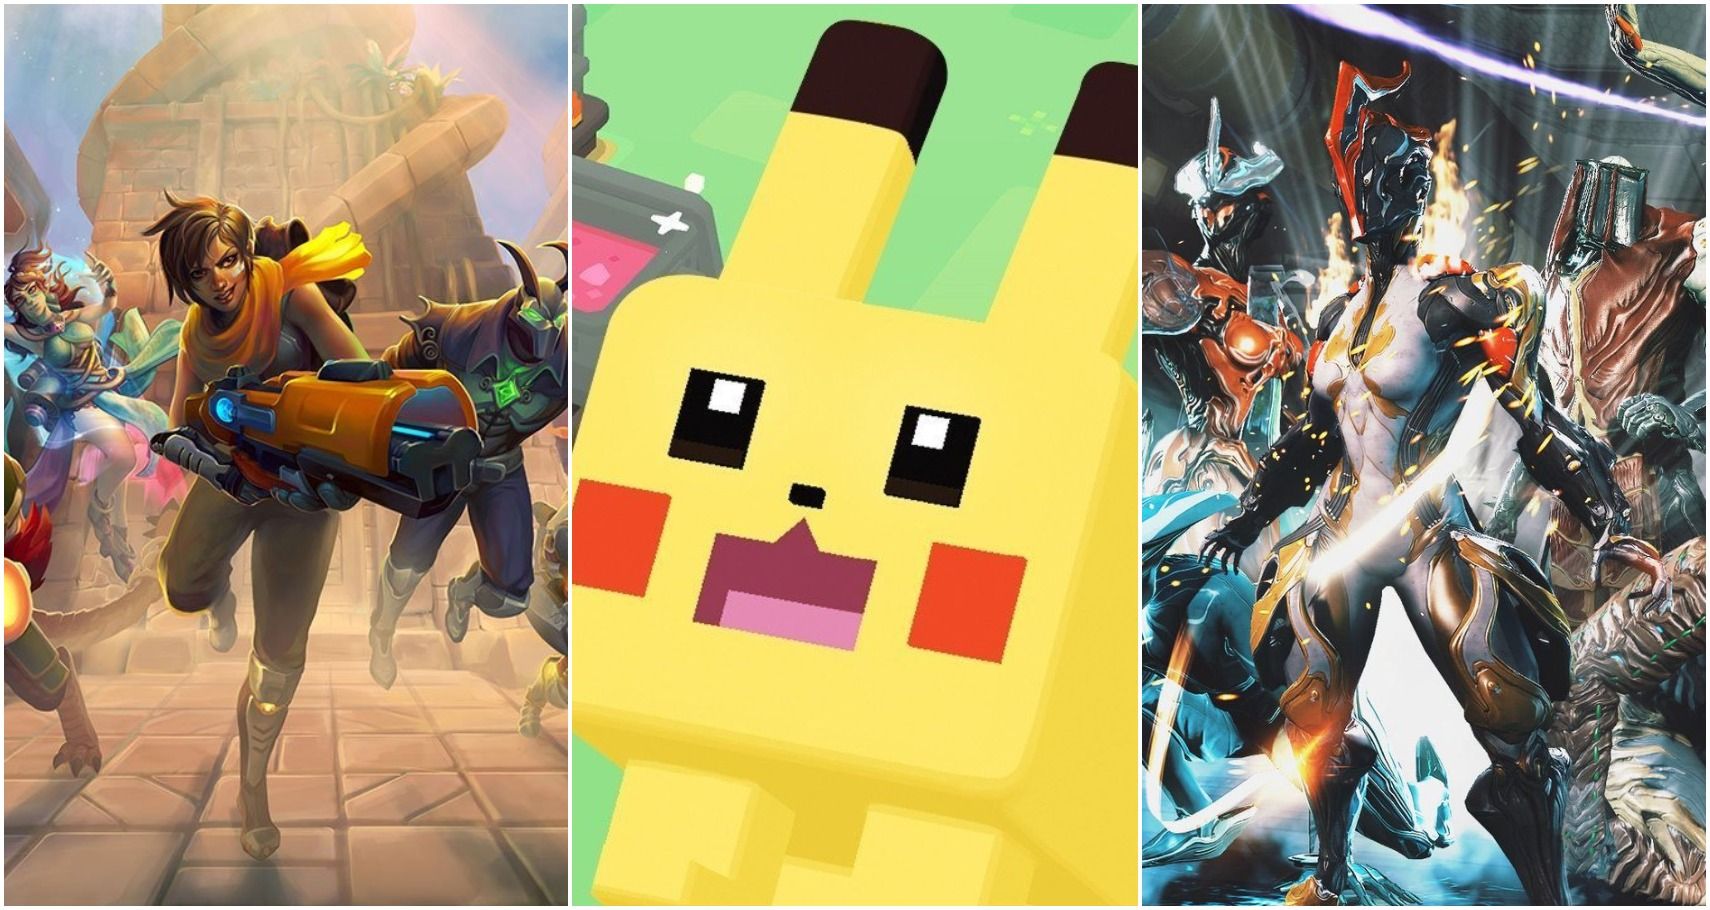 free games with nintendo switch online